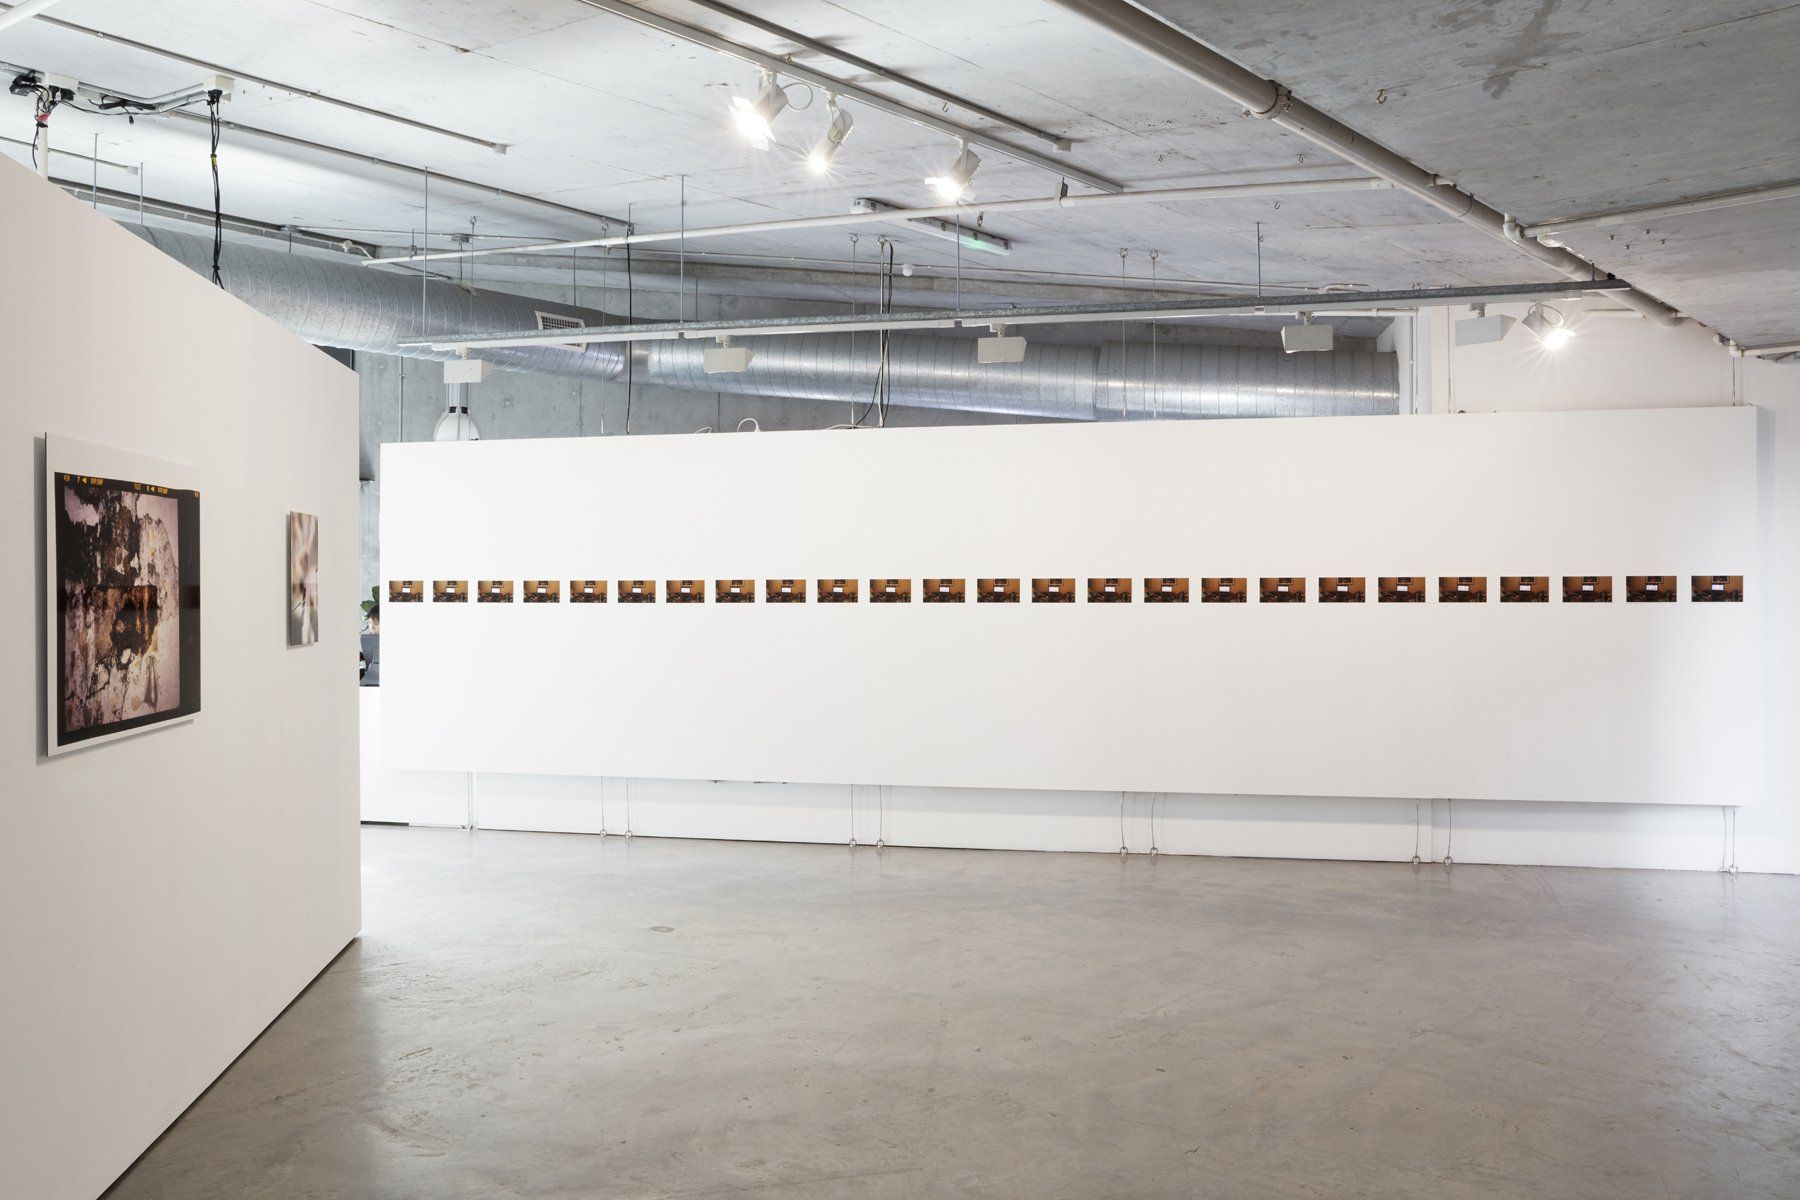 Installation view of Abridge at Verge Gallery. Courtesy Verge Gallery, photographed by Zan Wimberley.